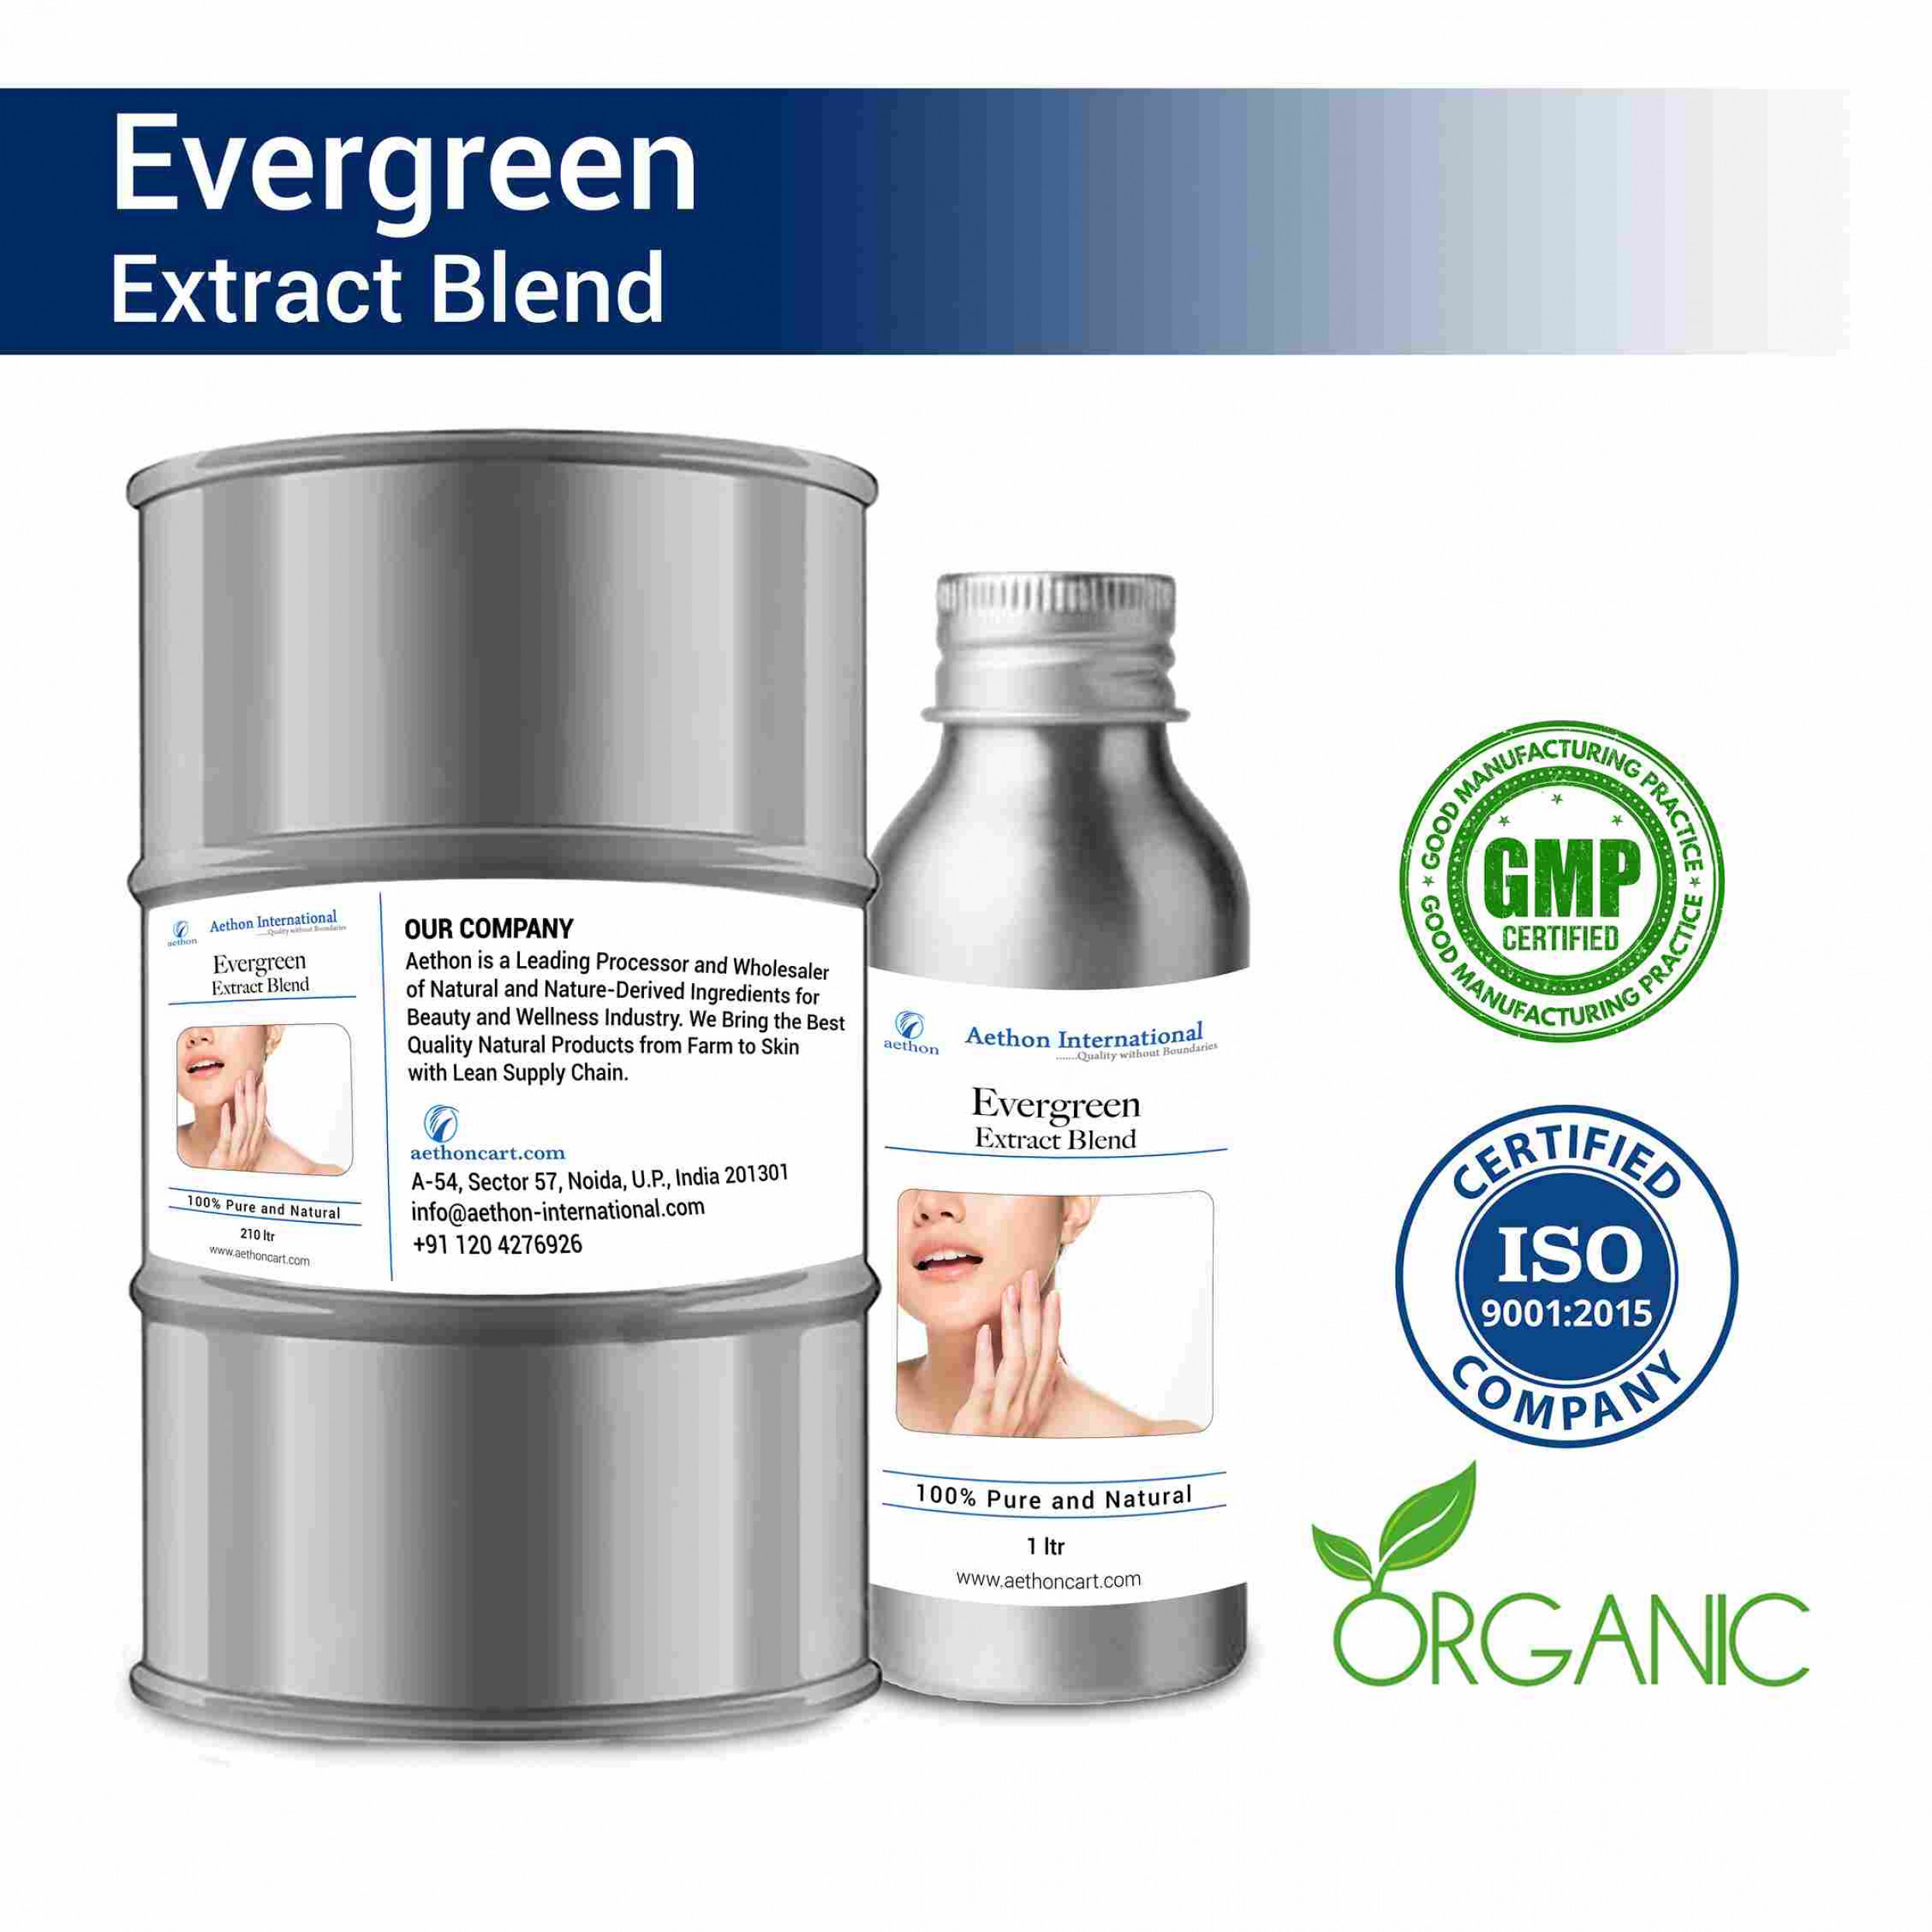 Evergreen Extract Blend (Water)